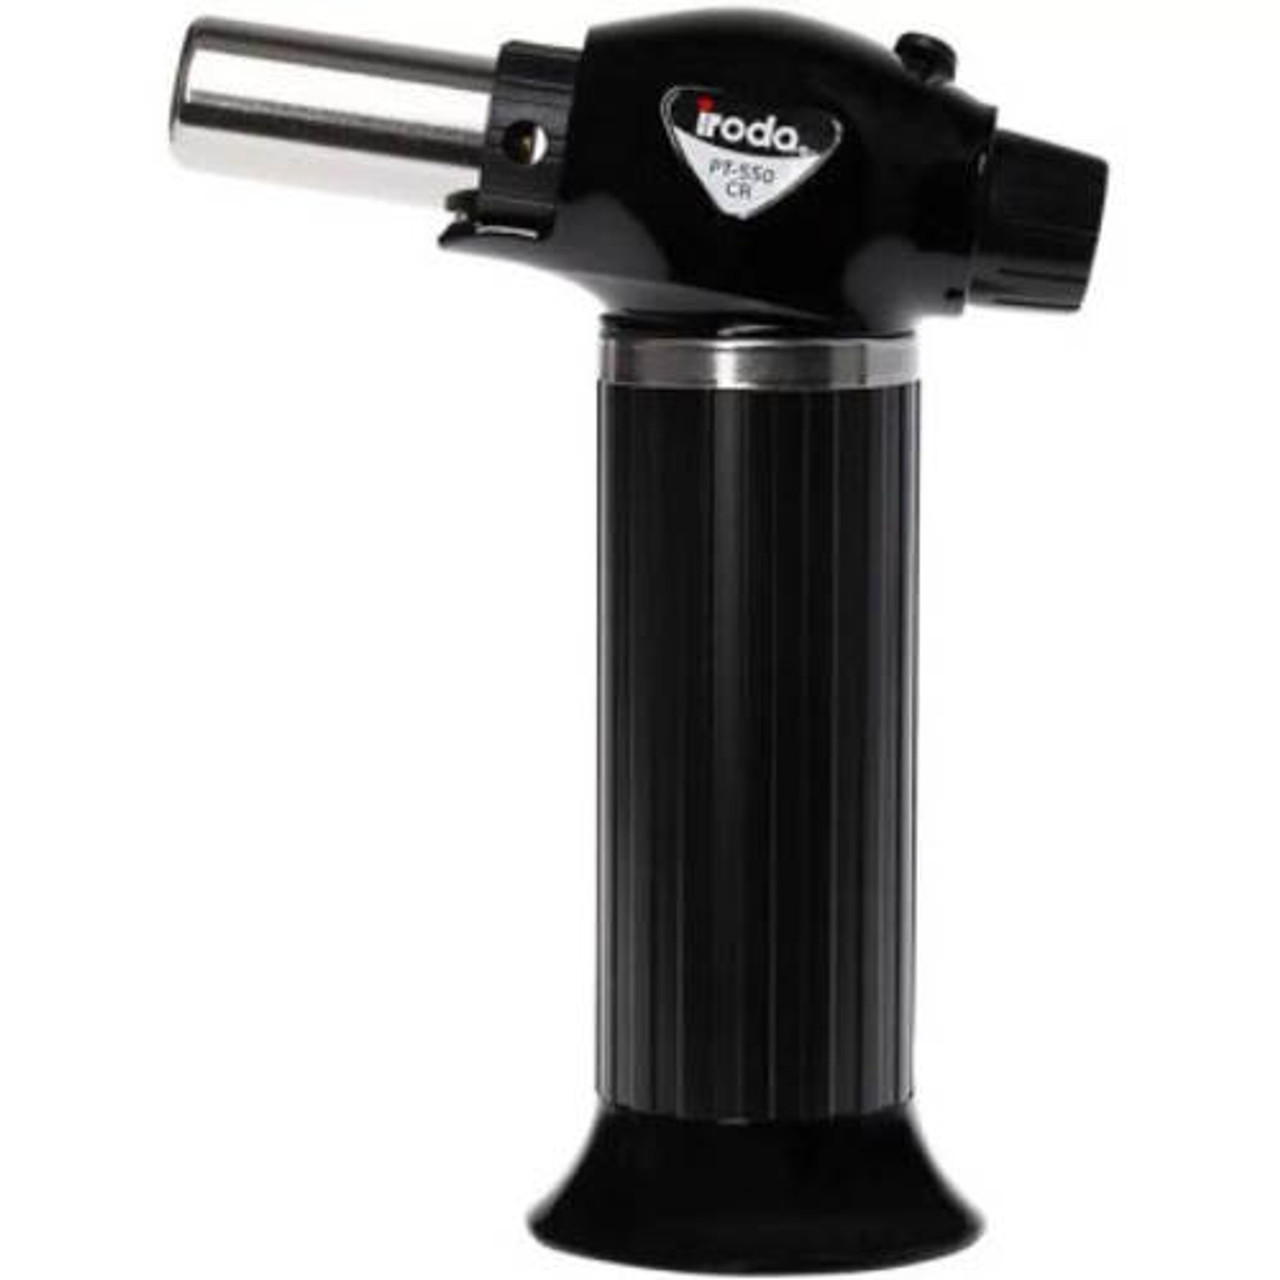 Heavy Duty flame output!  Flame extends out approximately 5".  Comes in a variety of colors!